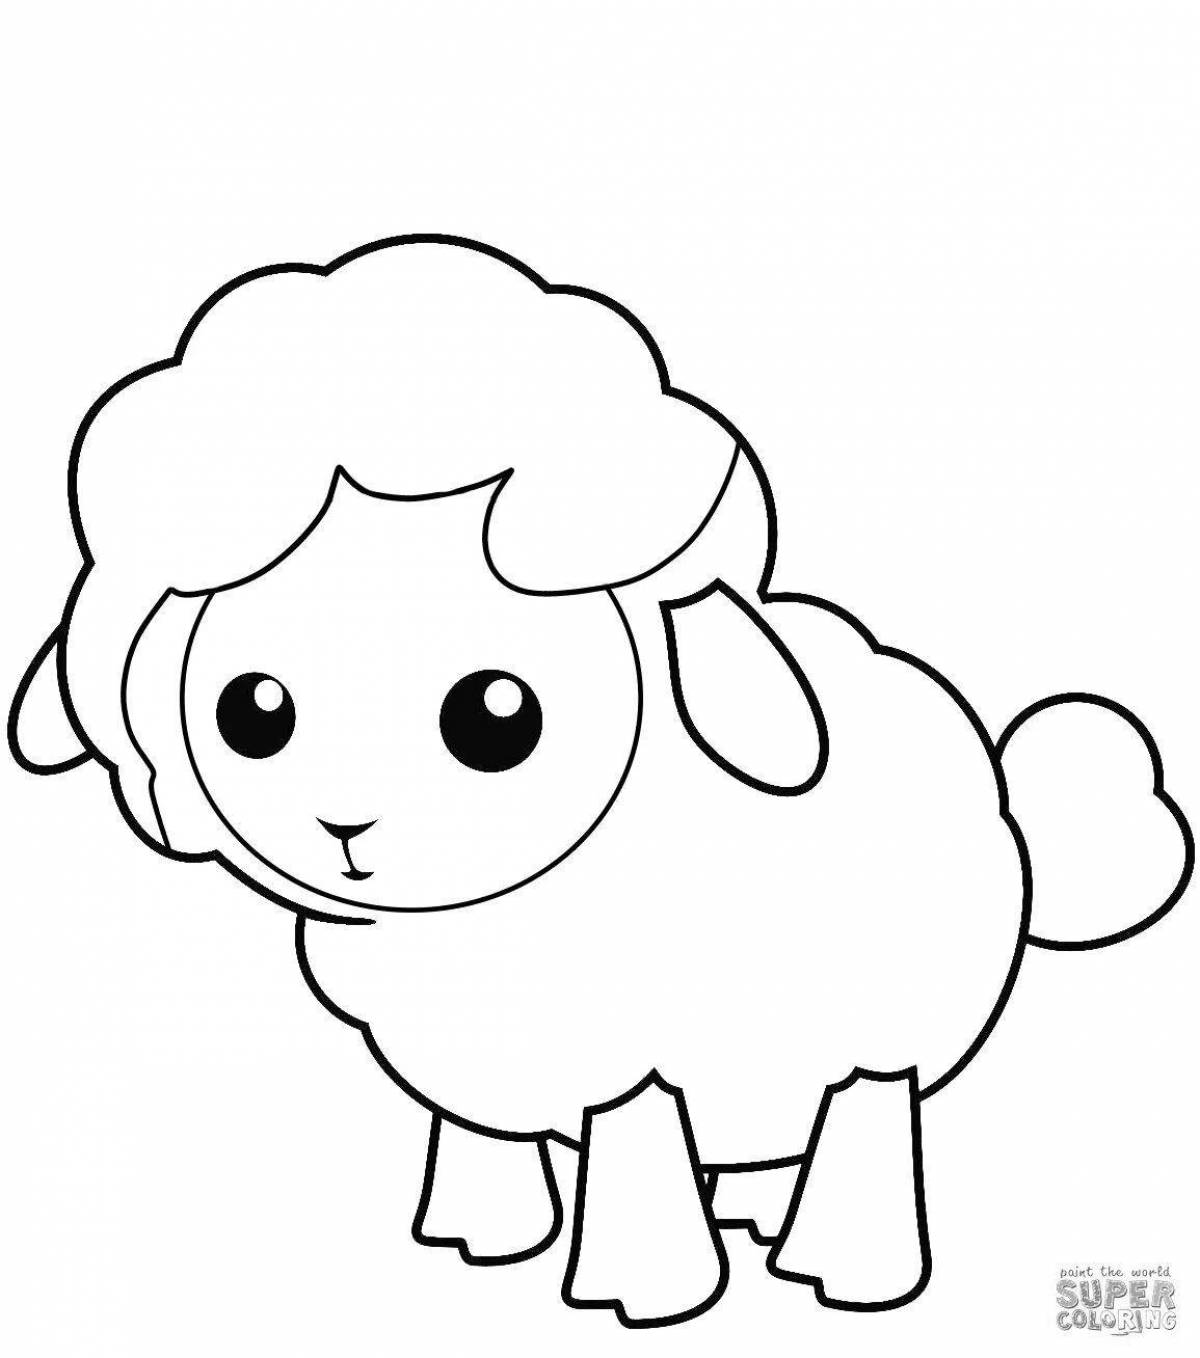 Adorable sheep coloring book for 2-3 year olds